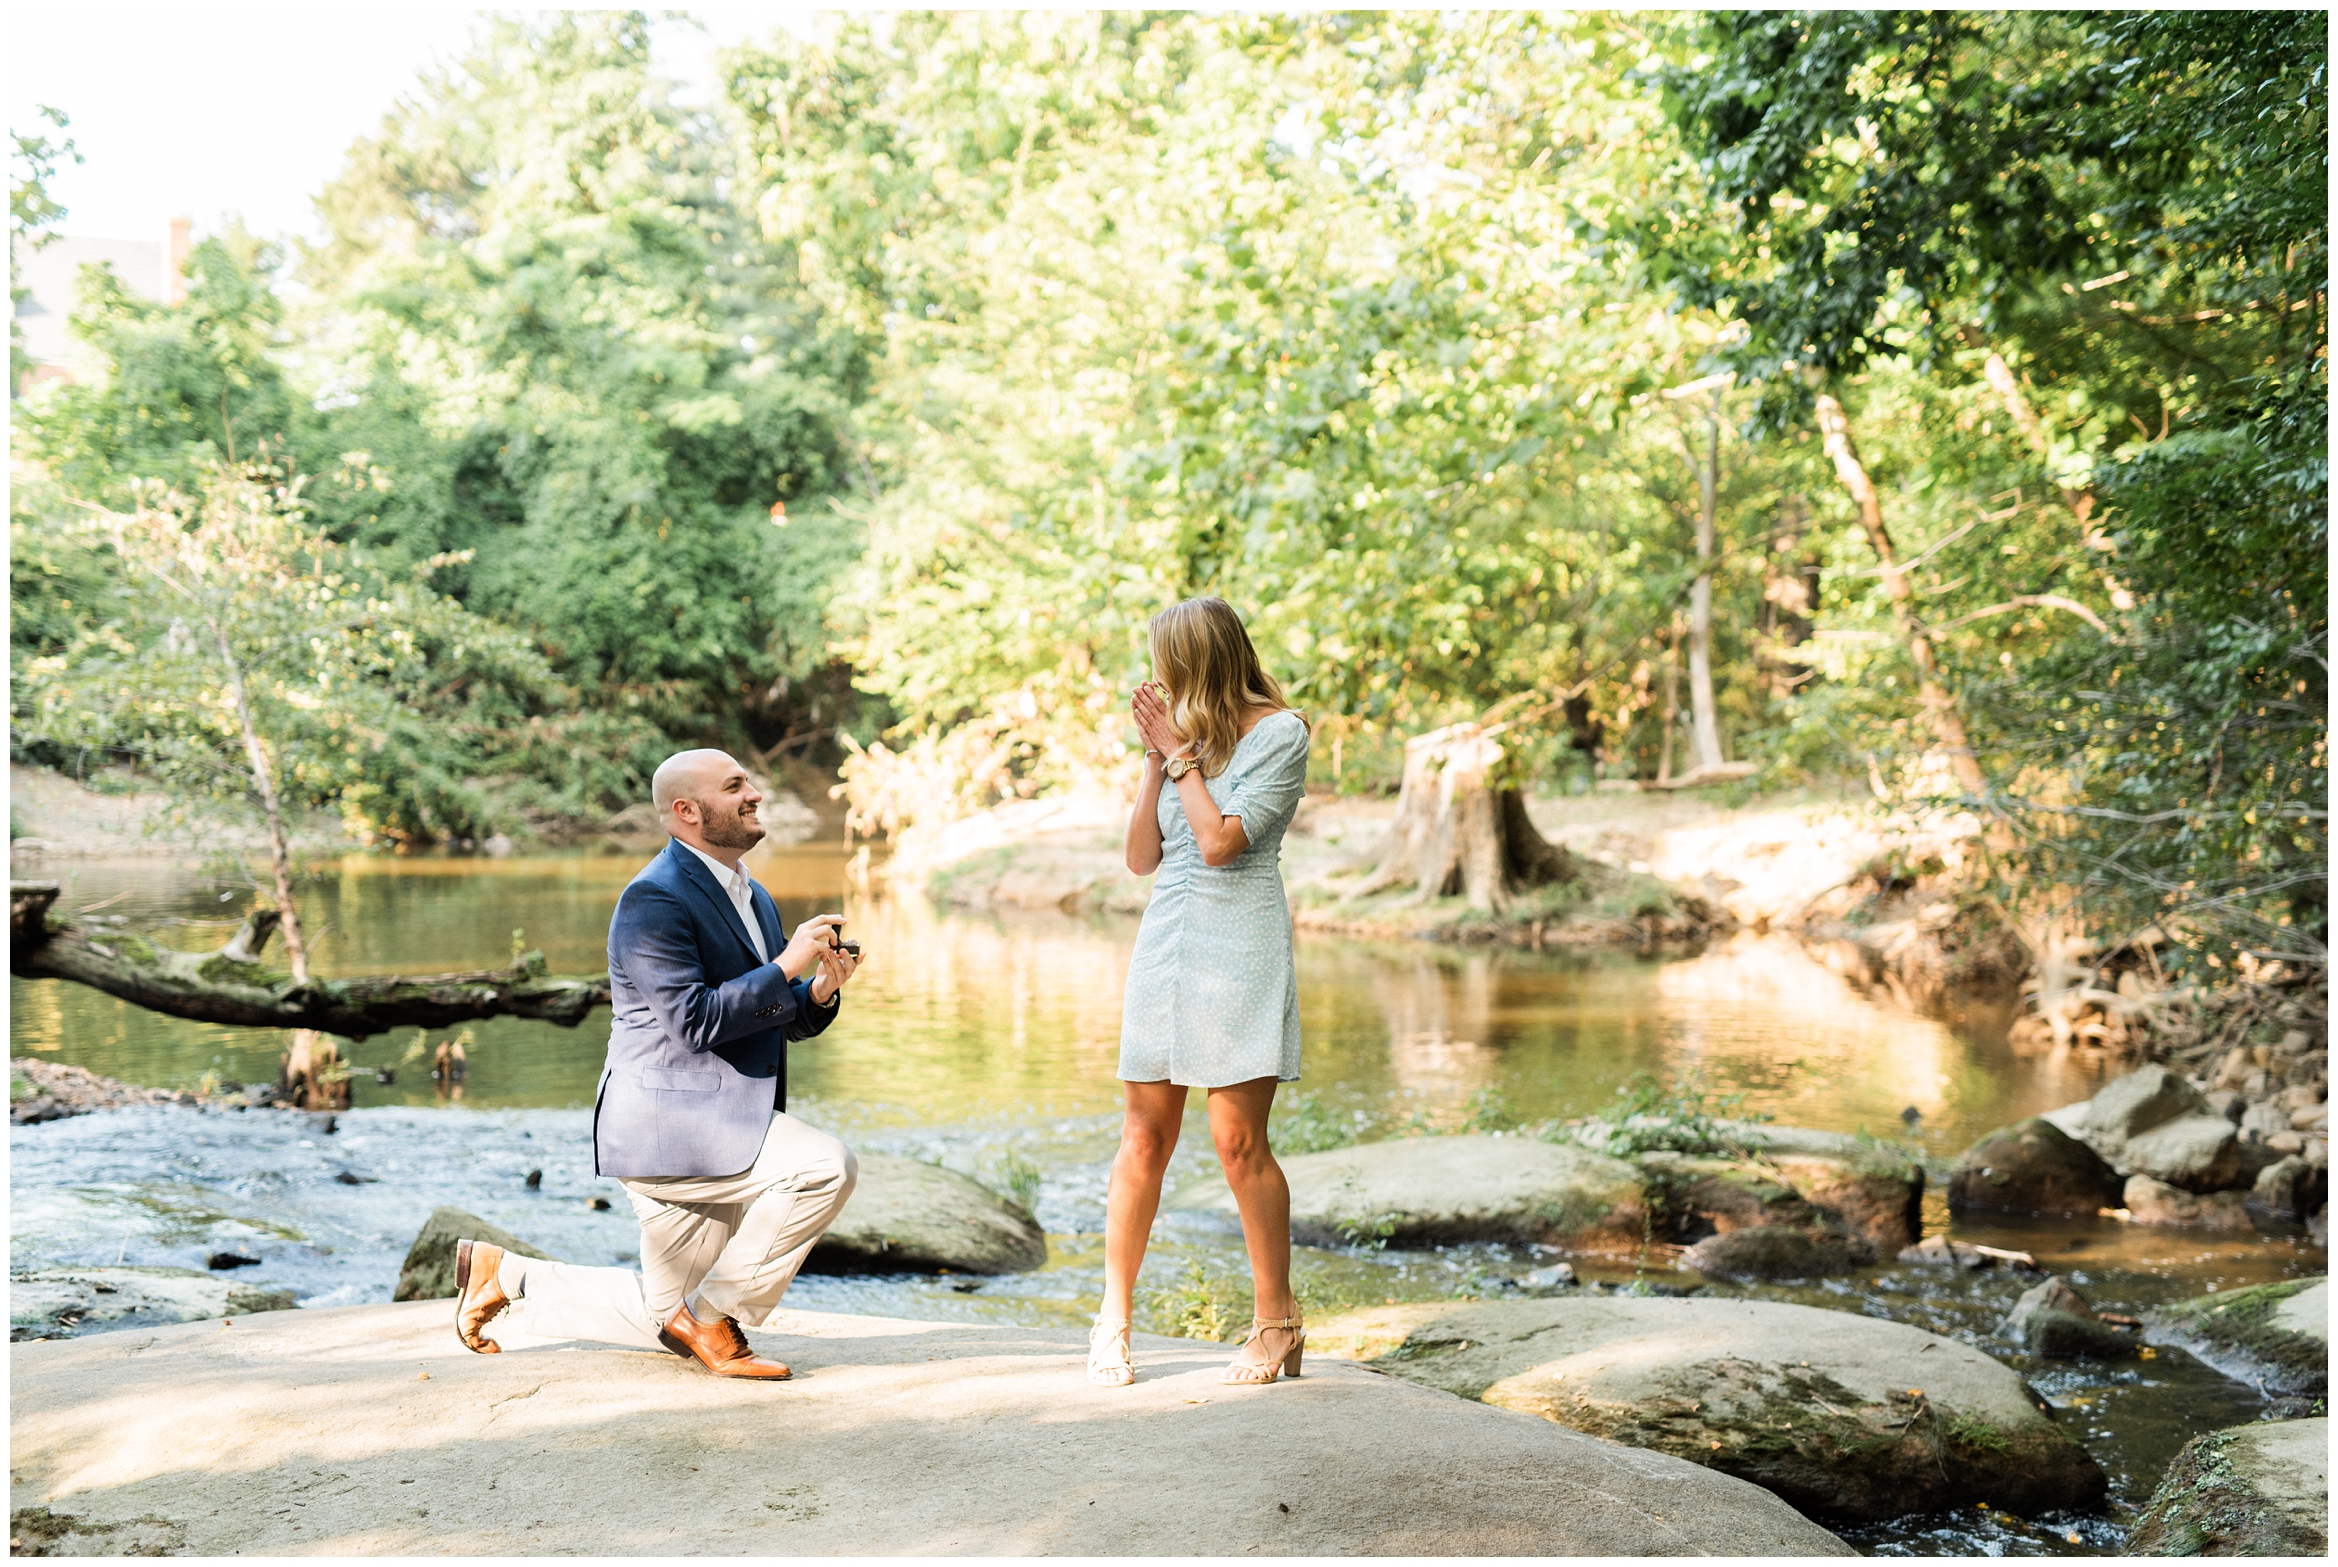 Guy proposing in front of river in Richmond Virginia